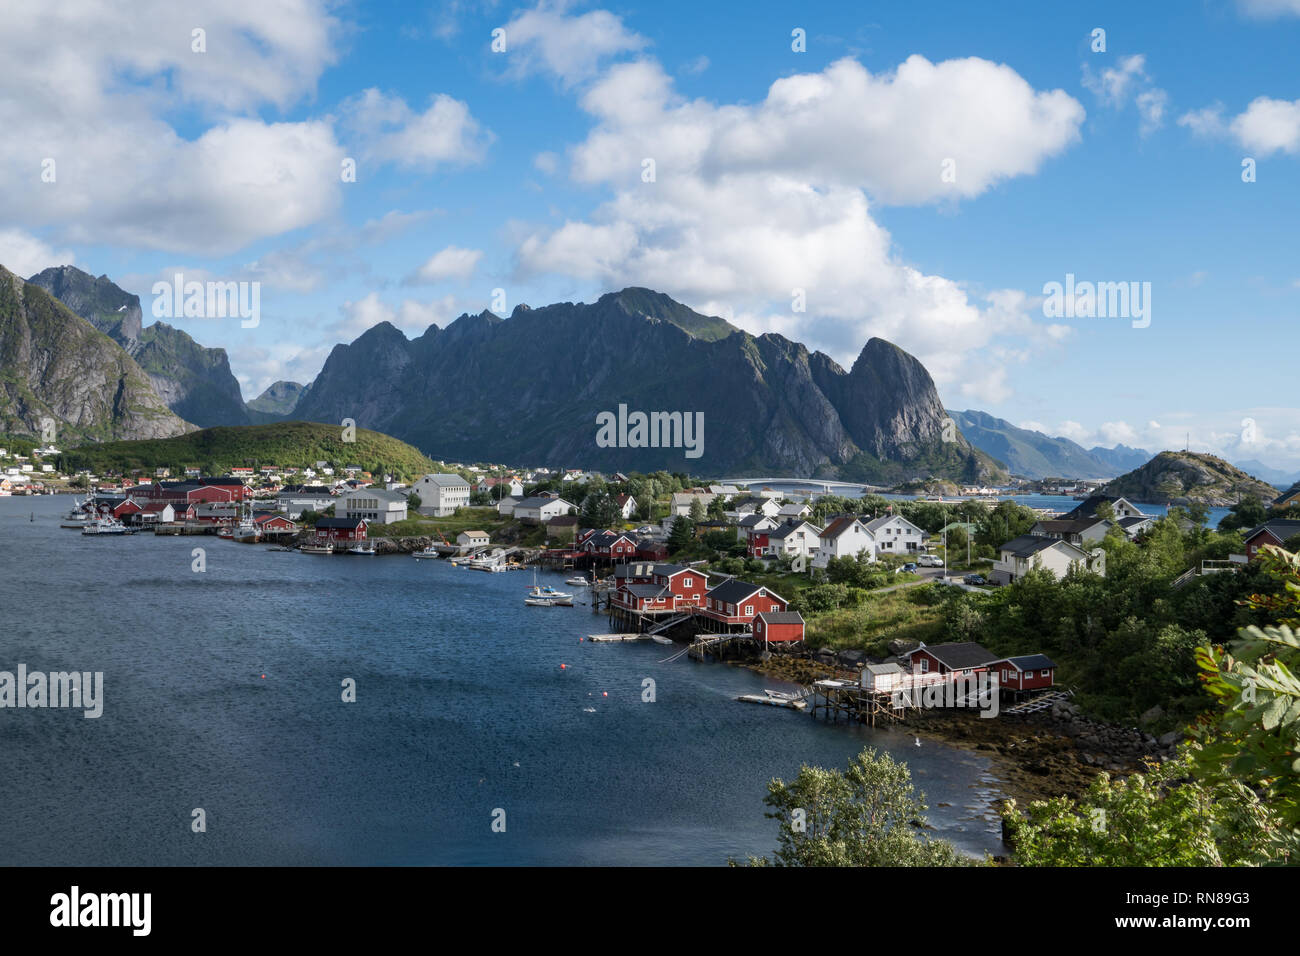 Dramatic view of Lofoten Islands Norway landscape view of fishing village with mountains, water and blue sky. Stock Photo